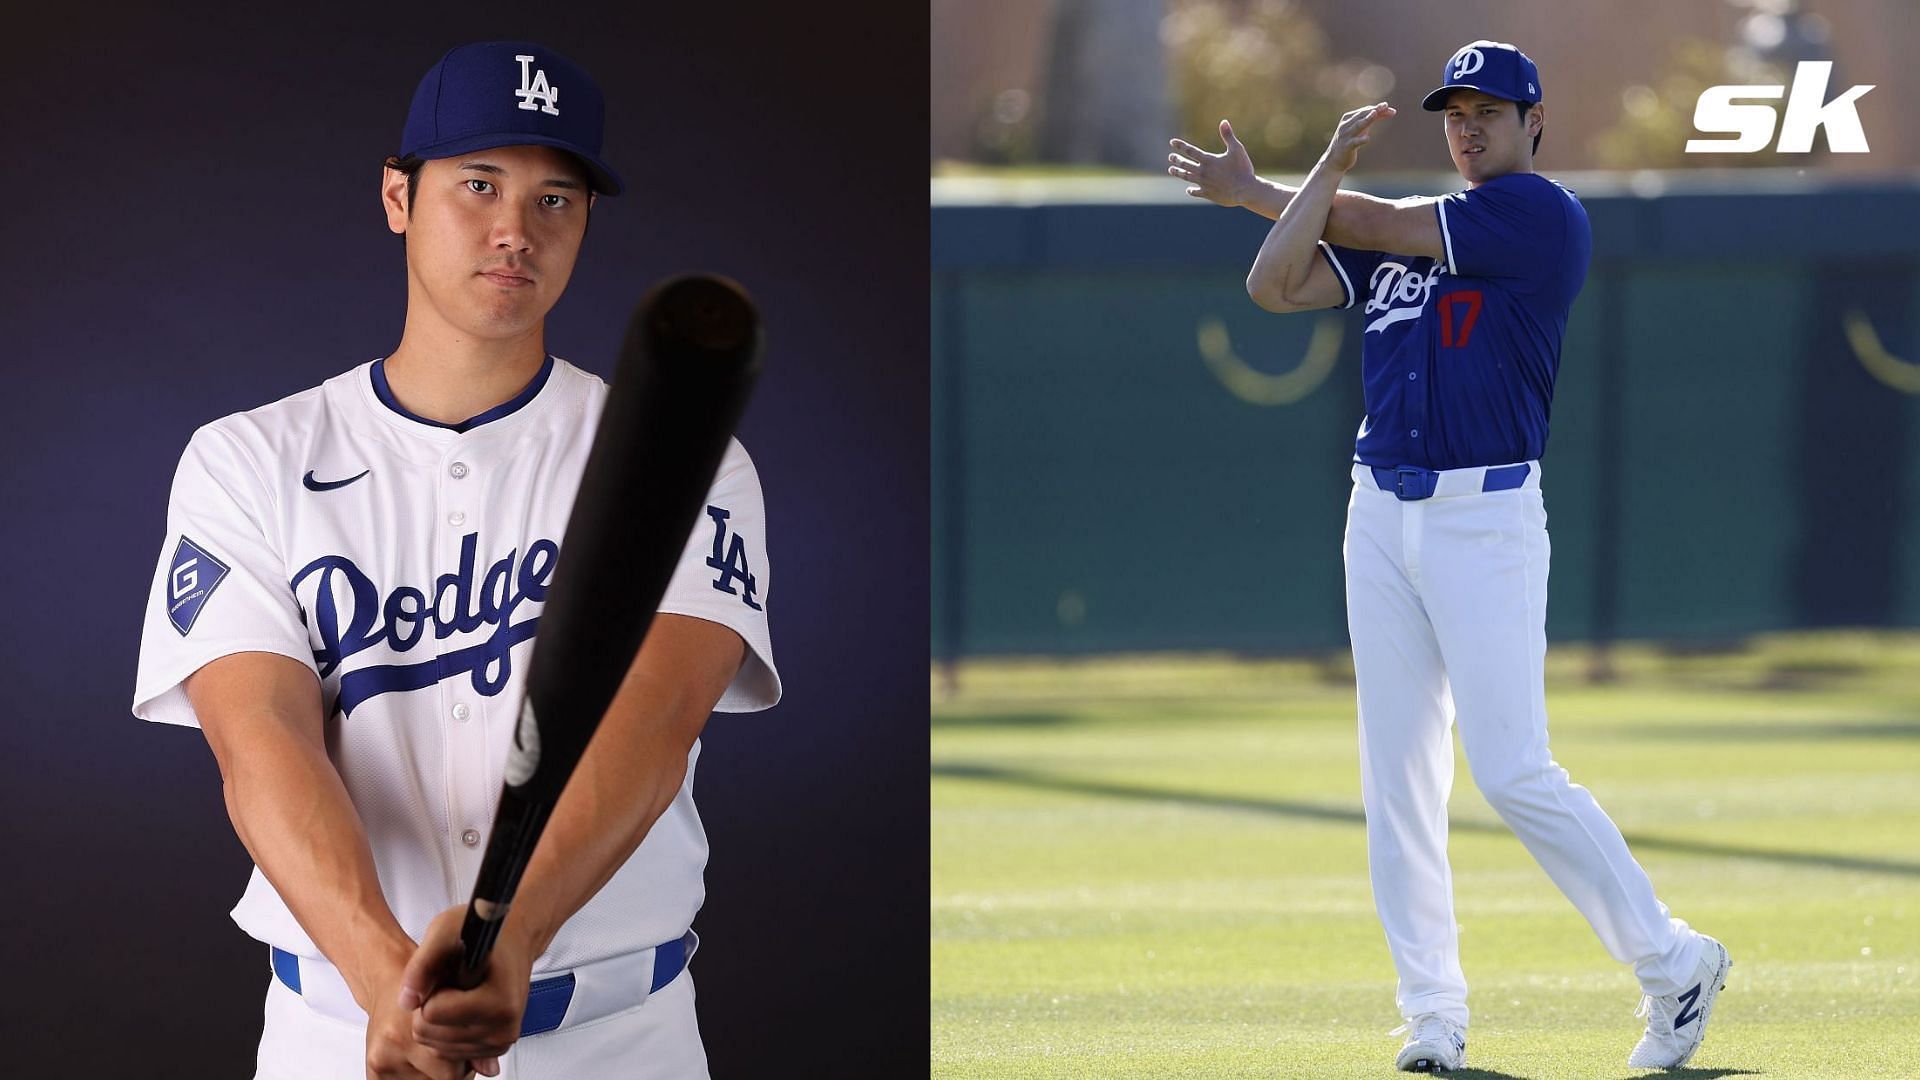 Shohei Ohtani set to make Spring Training debut &quot;some time next week&quot; says Dodgers manager Dave Roberts